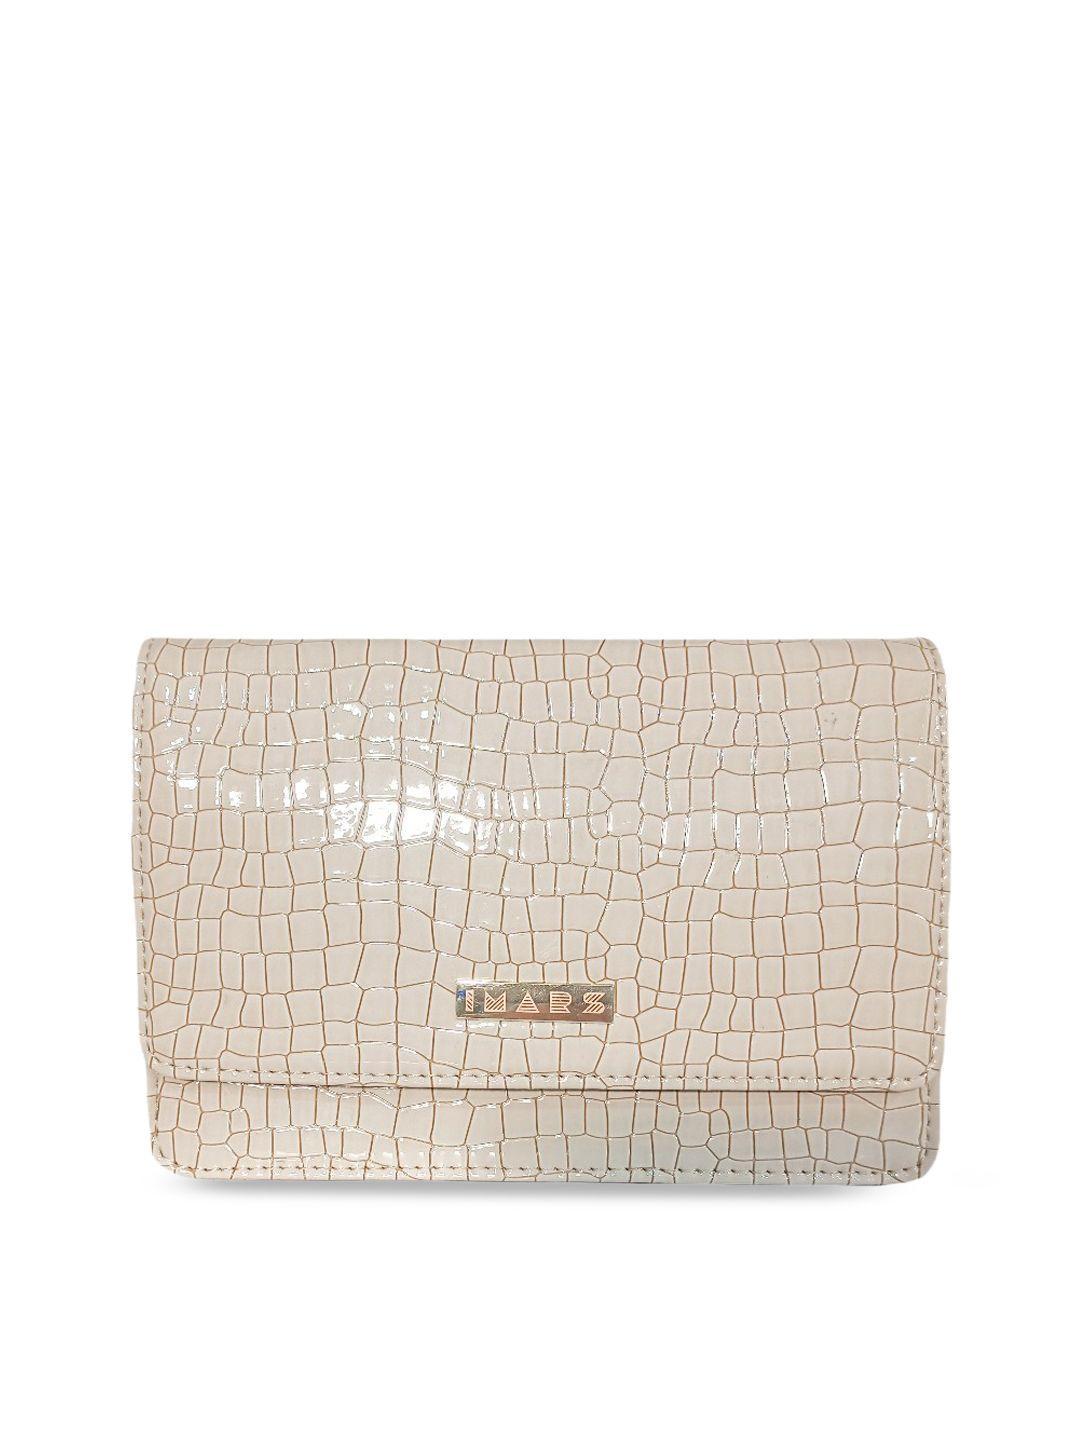 imars-cream-coloured-structured-hobo-bag-with-quilted